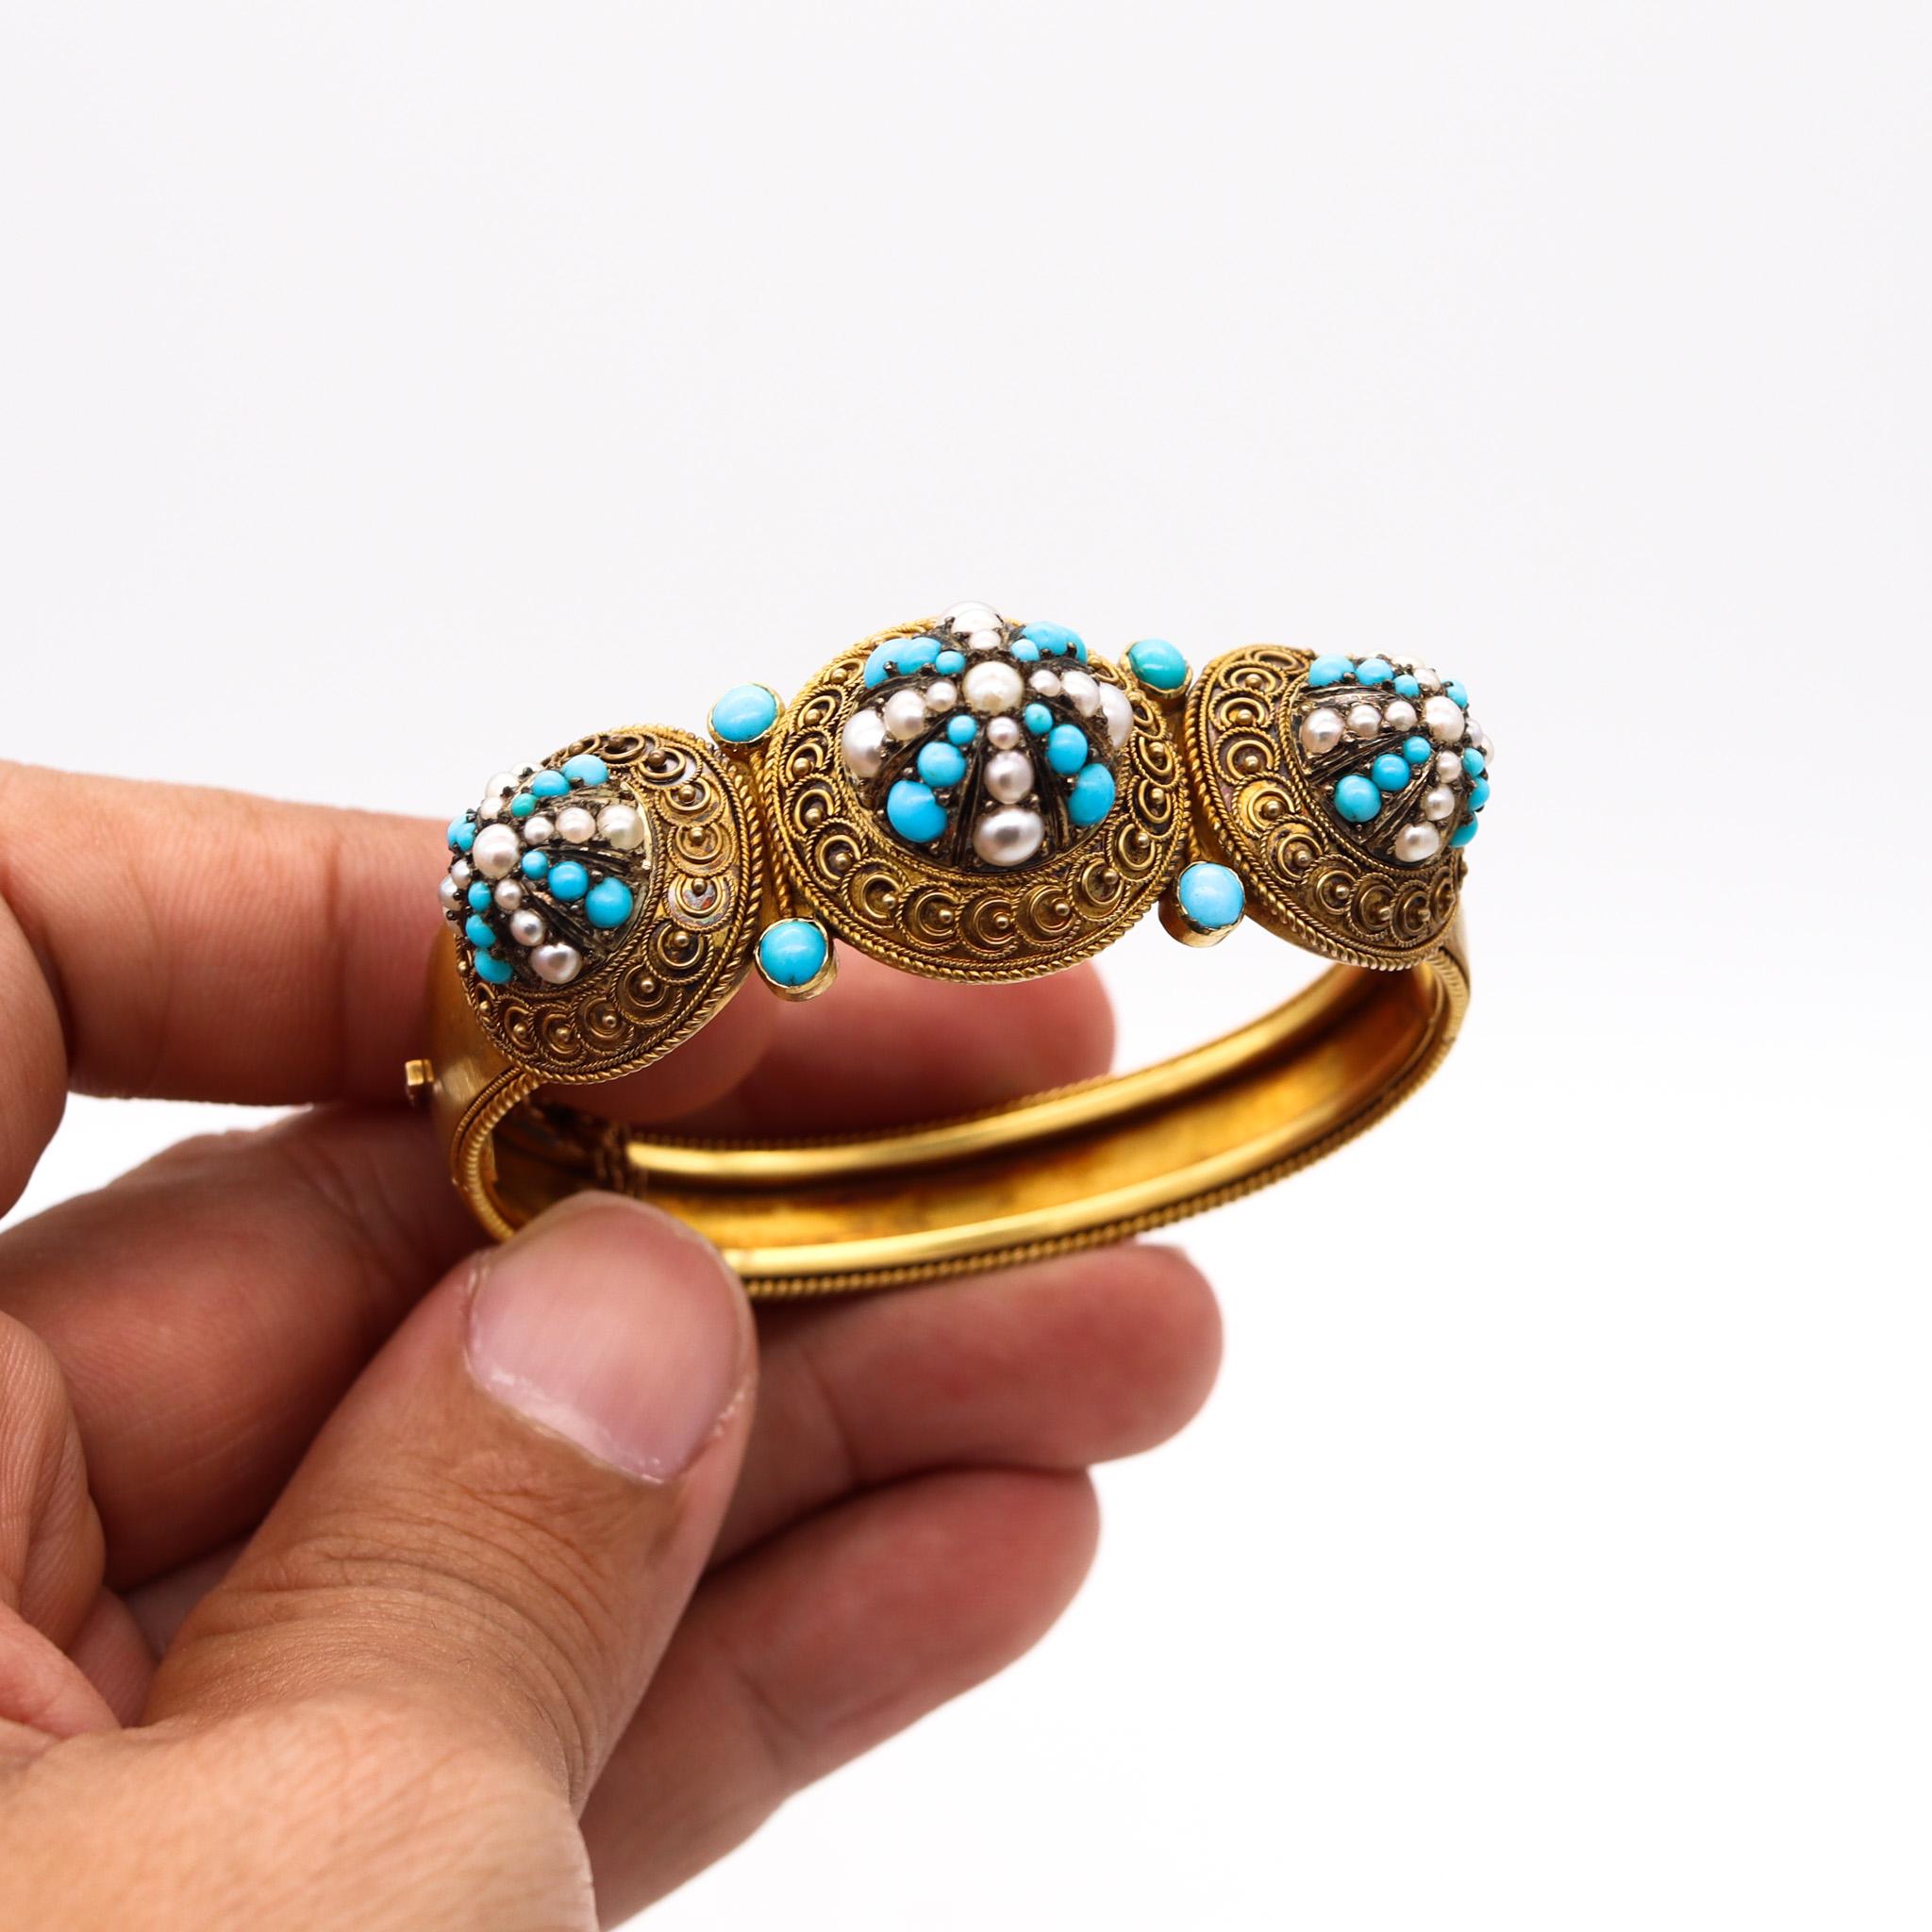 Women's Victorian 1880 Etruscan Revival Bracelet in 15kt Gold with Turquoises and Pearls For Sale